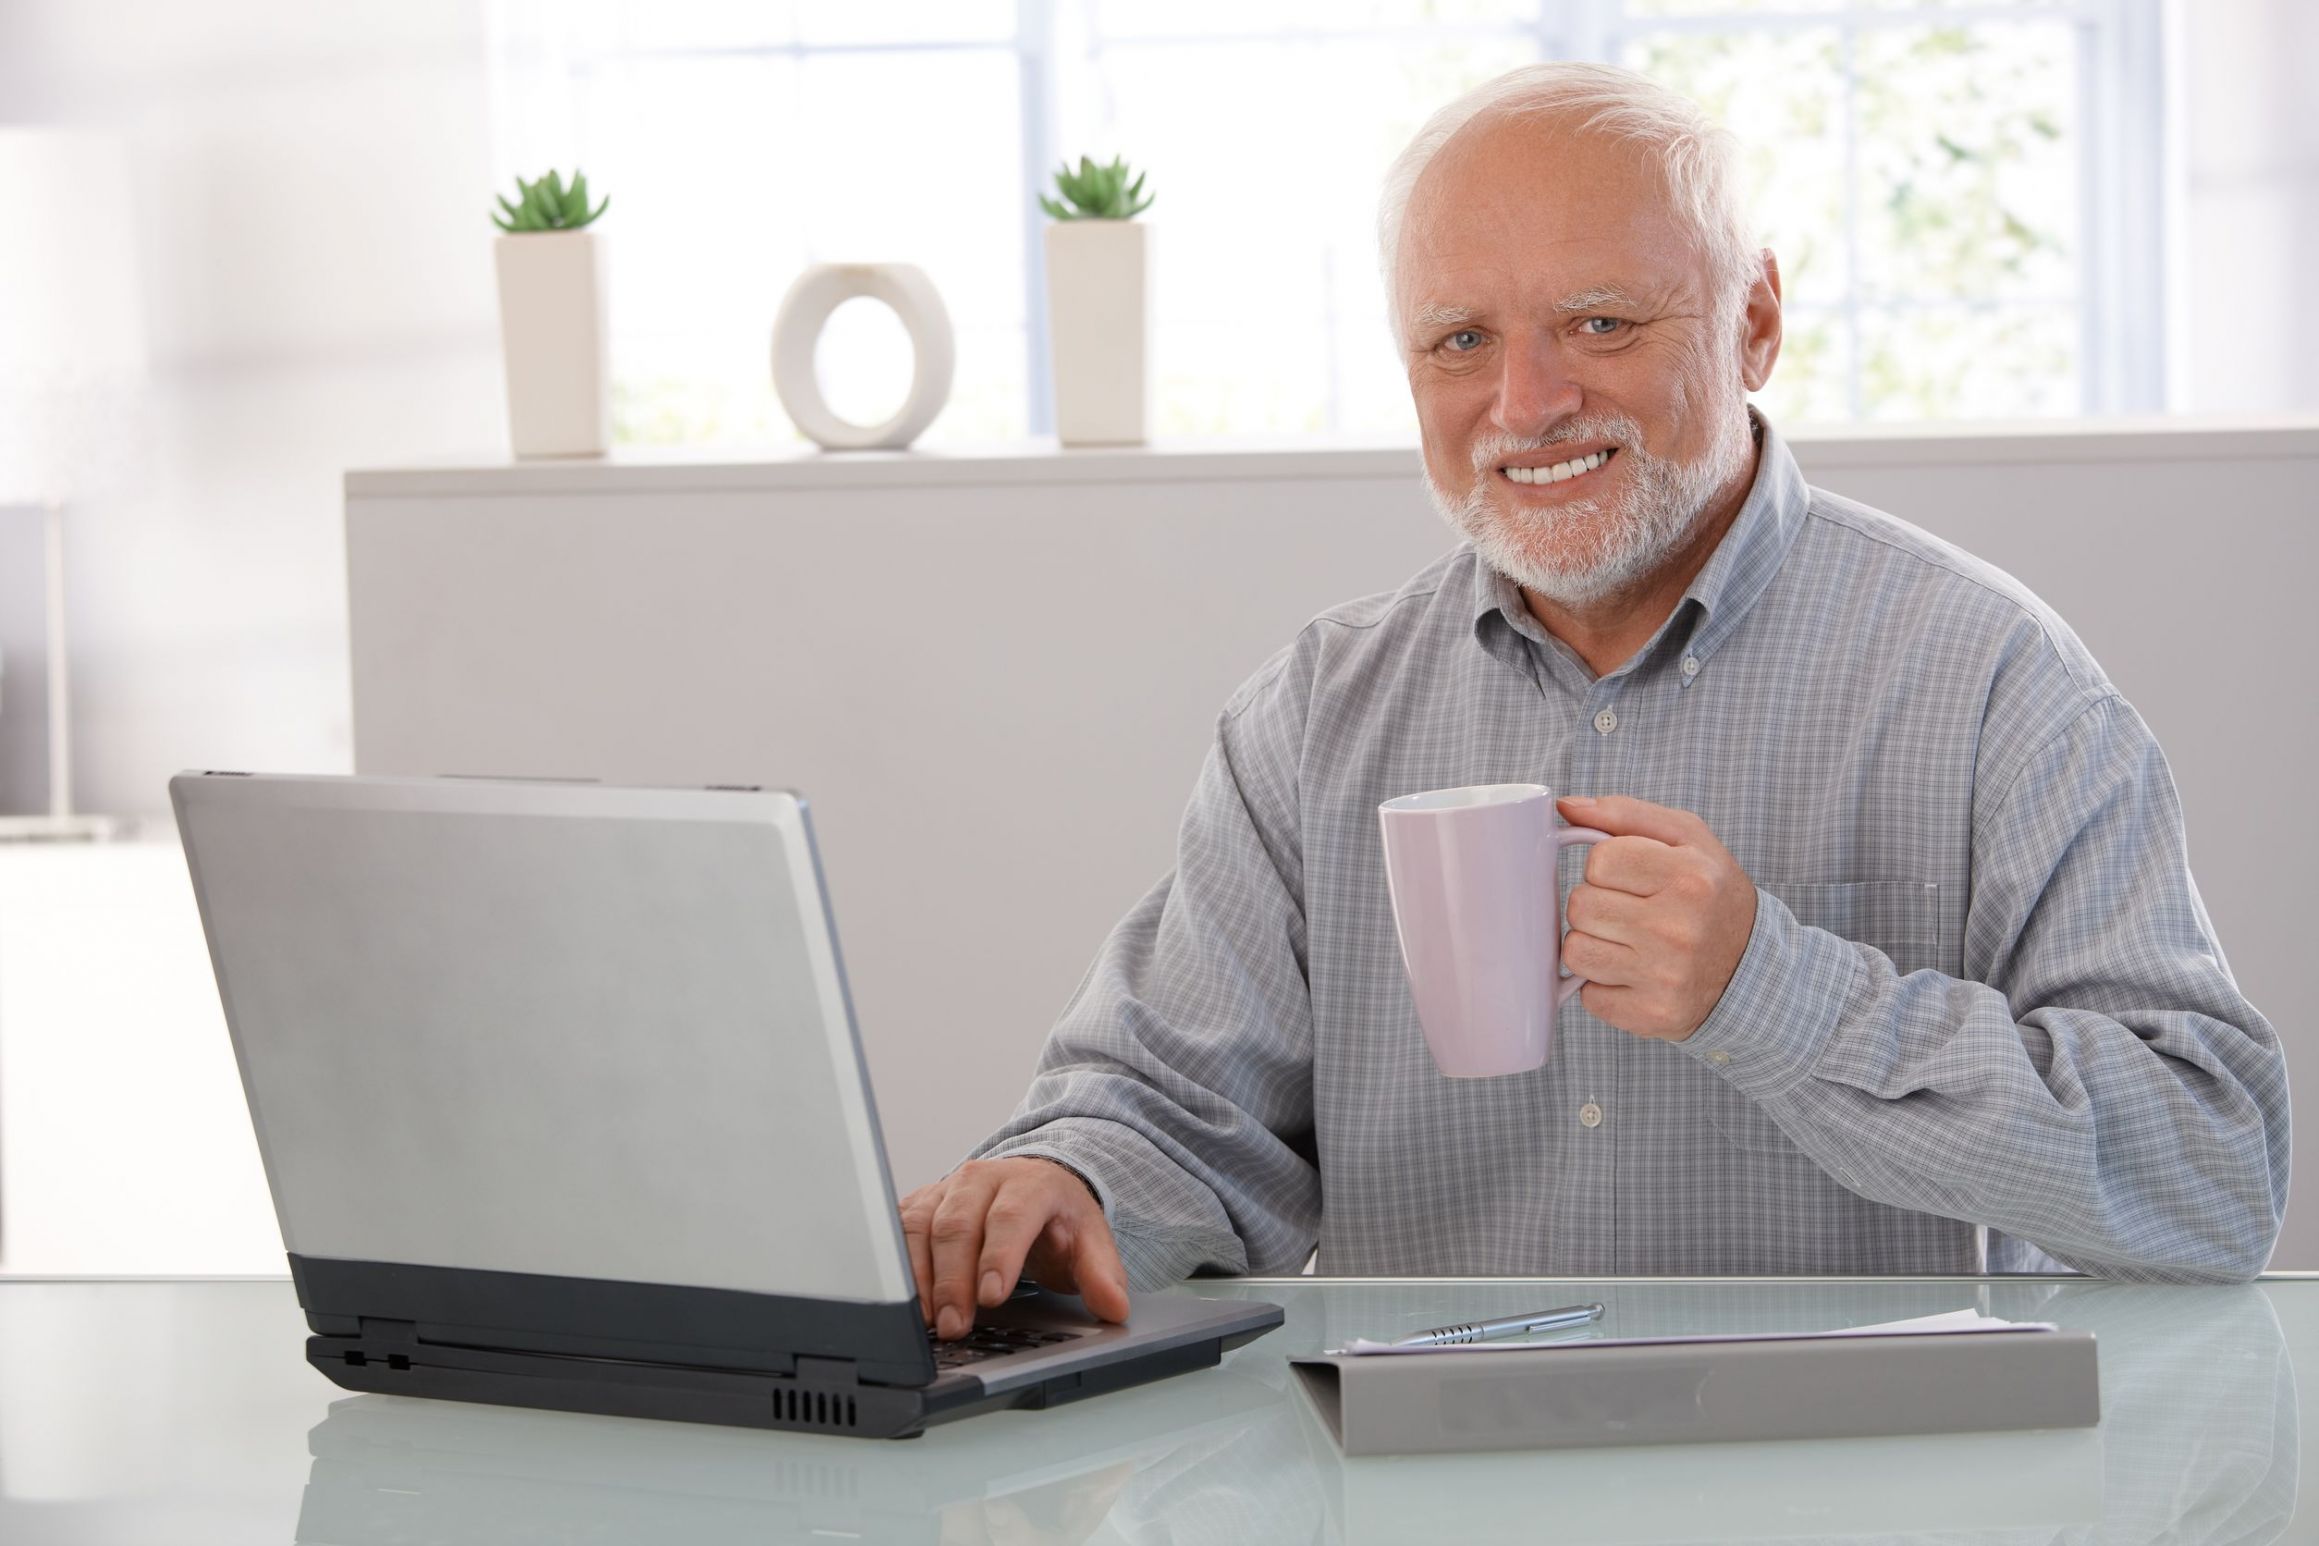 Hide the pain harold photo holding a mug in his hand givng a fake smile